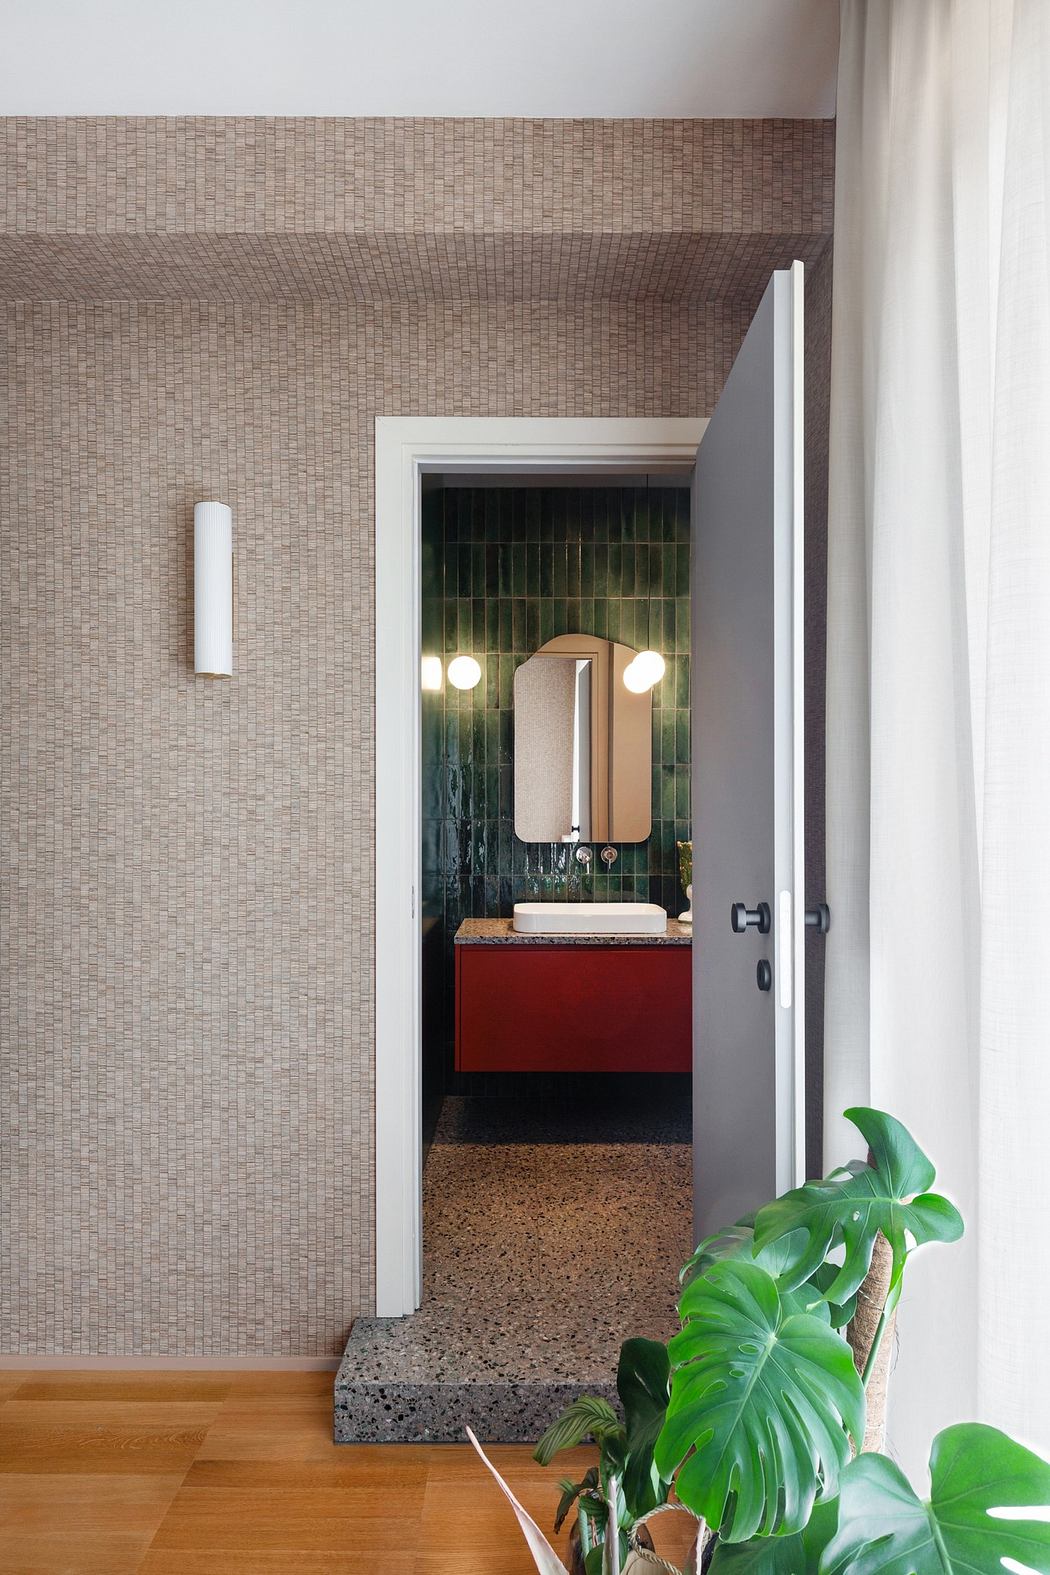 Modern bathroom viewed through an open door from a room with textured wallpaper and a house